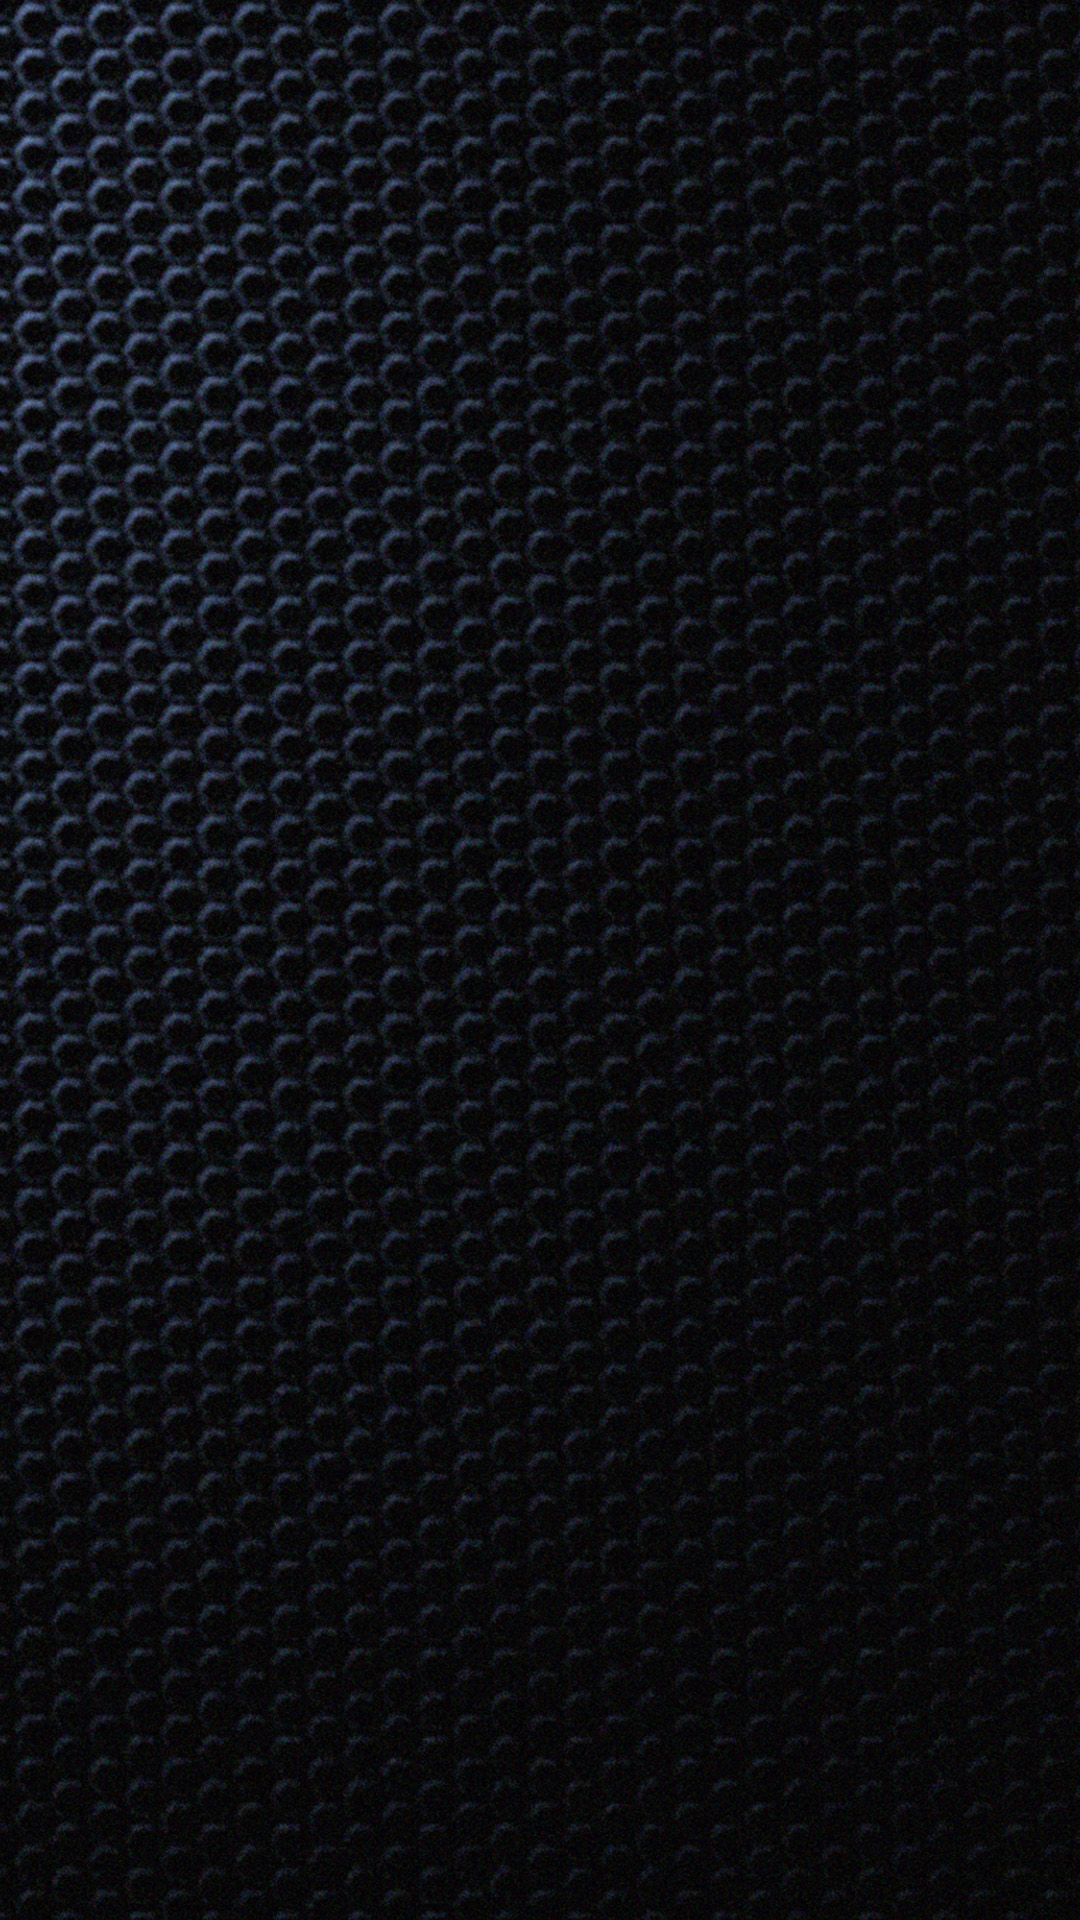 Black Texture 06 Galaxy S5 Wallpapers Samsung Galaxy S5 Wallpapers HD